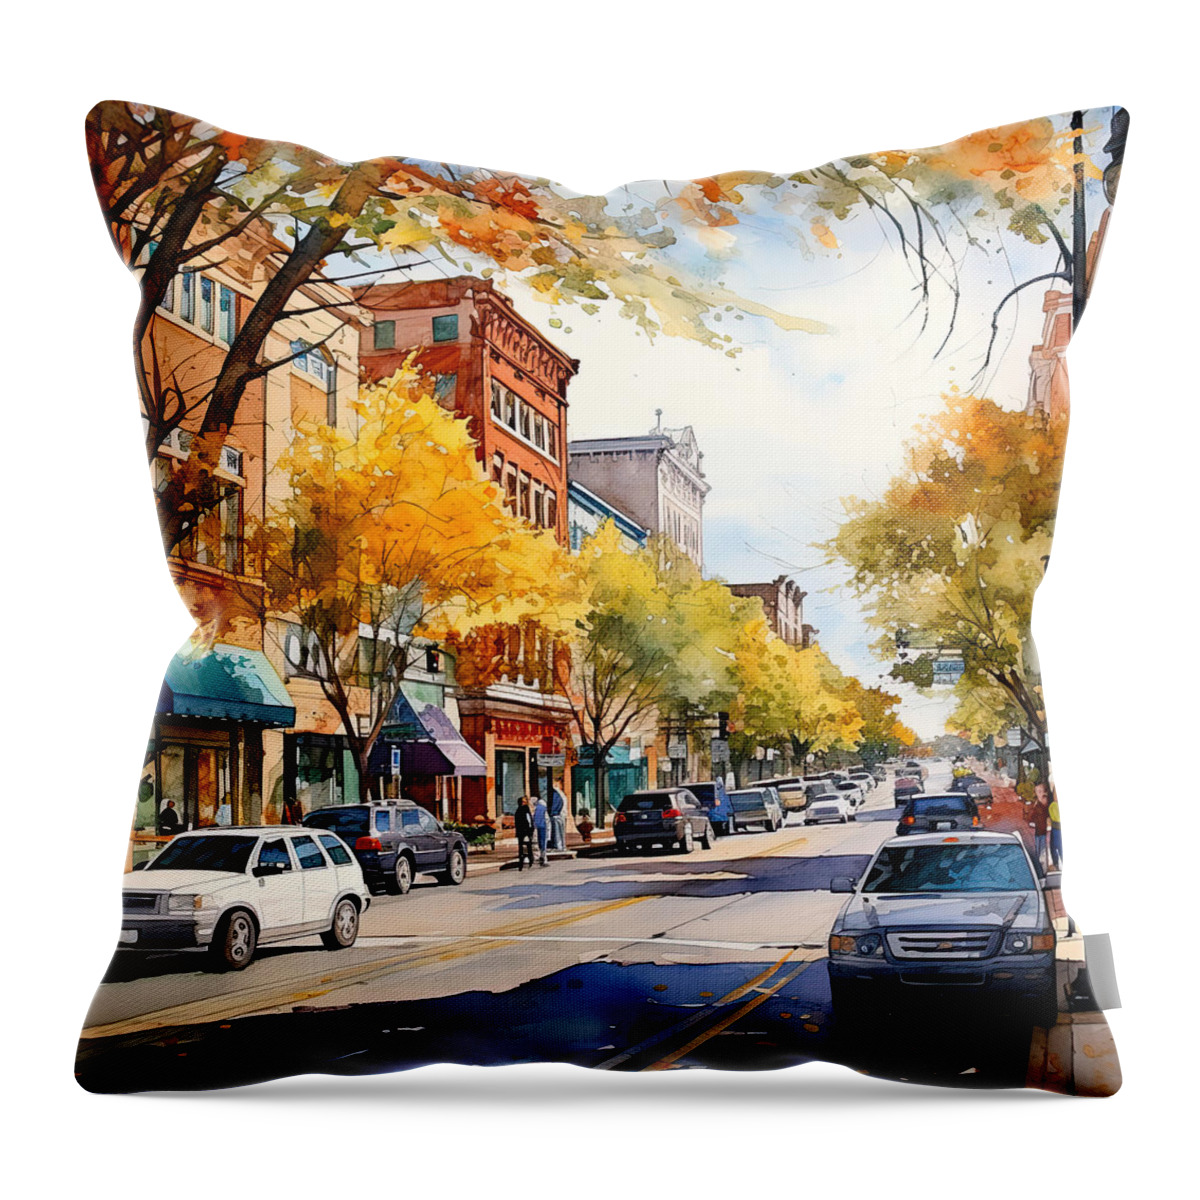 Hot Springs Arkansas Throw Pillow featuring the painting Fall Downtown Stores by Lourry Legarde